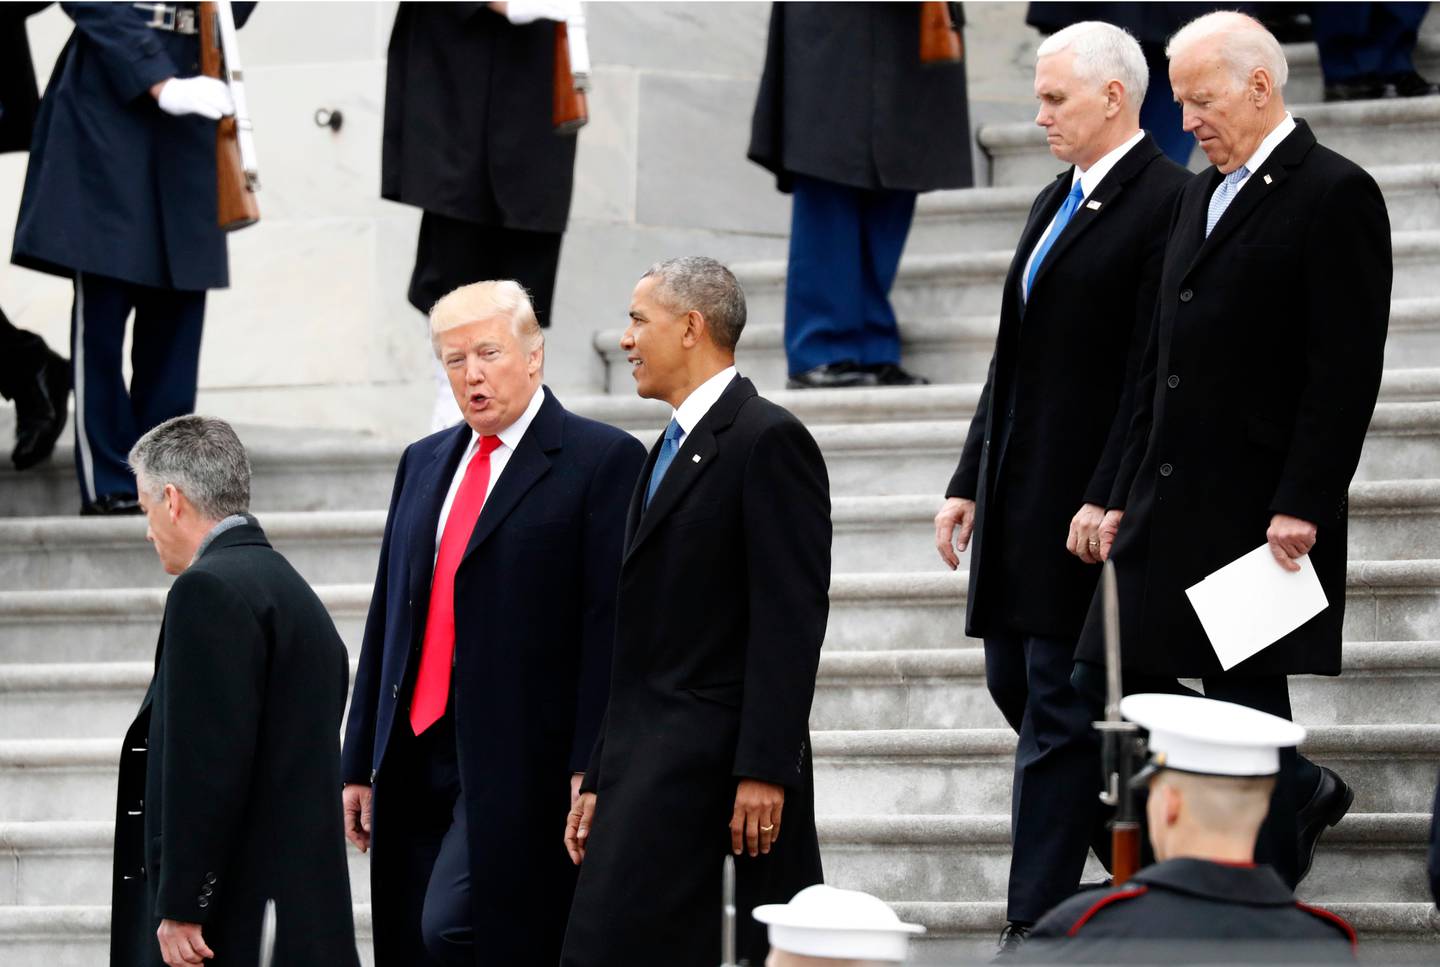 President Donald Trump walks with former President Barack Obama as Vice President Mike Pence walks with former Vice President Joe Biden as the Obamas and Bidens depart the East Front of the U.S. Capitol, Friday, Jan. 20, 2017 in Washington. (AP Photo/Alex Brandon)